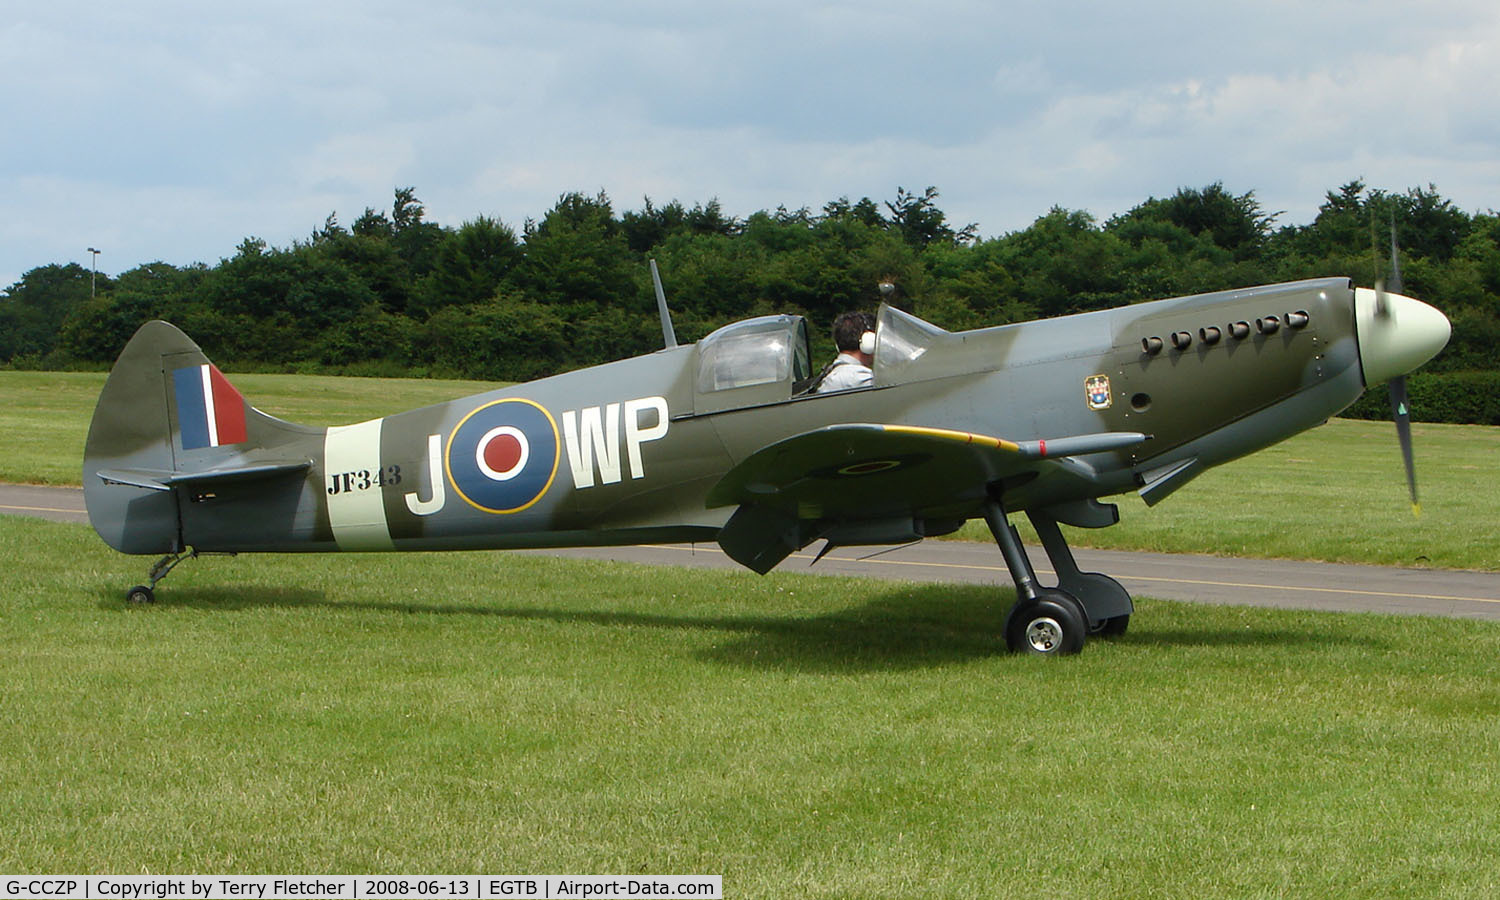 G-CCZP, 2005 Supermarine Aircraft Spitfire Mk.26 C/N PFA 324-14062, This Spitfire MK26 also waers Serial JF343 and was a visitor to Wycombe Air Park